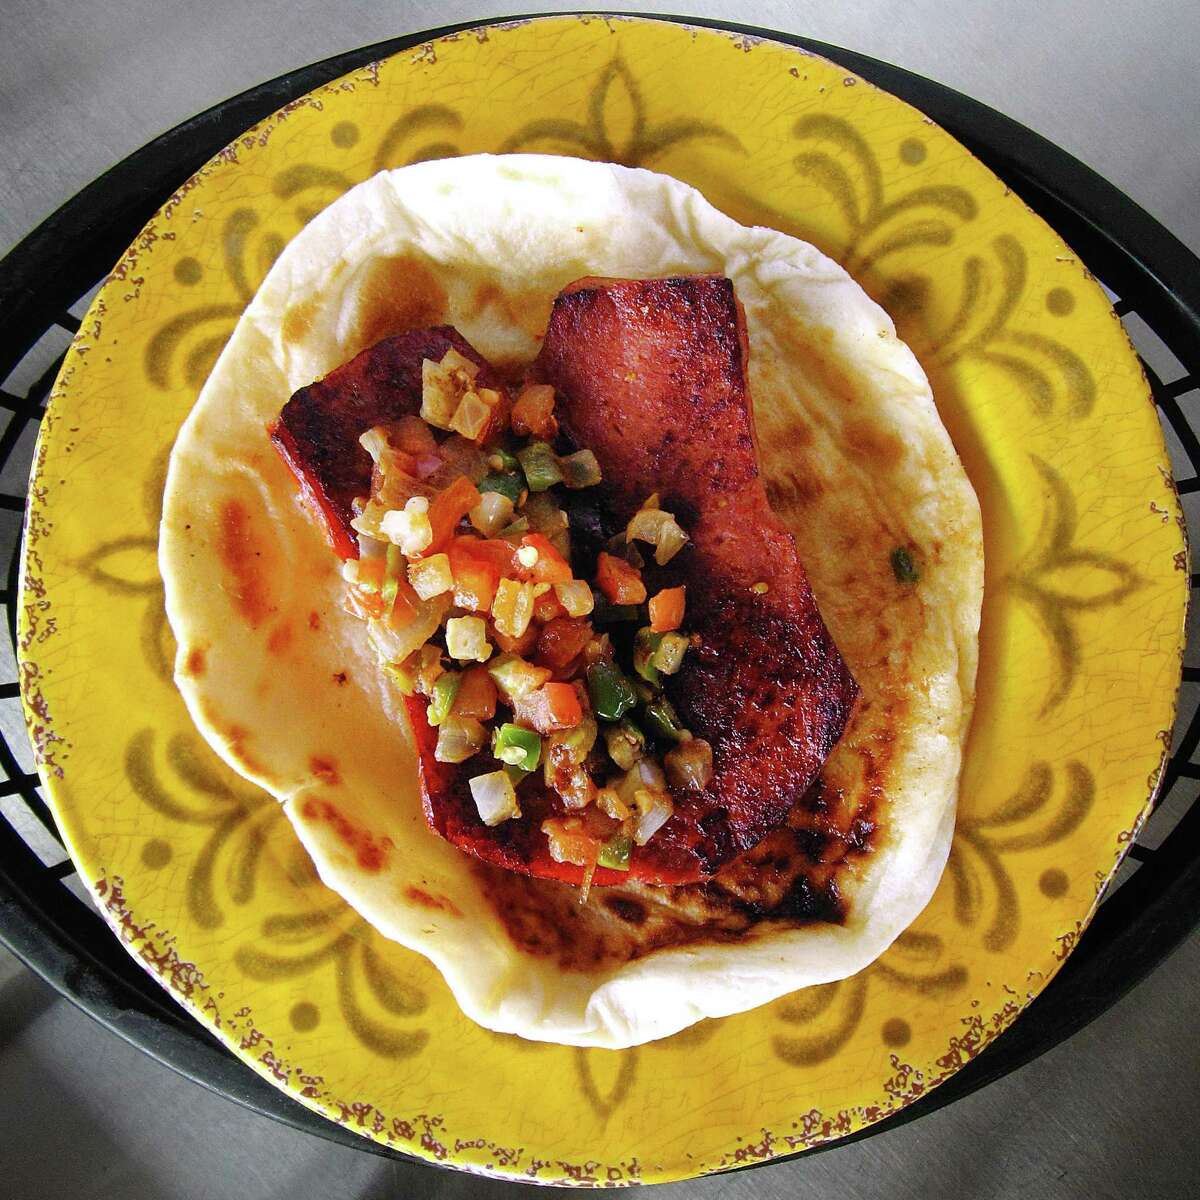 Country sausage link a la mexicana taco on a handmade flour tortilla from Tony's Tacos To Go.